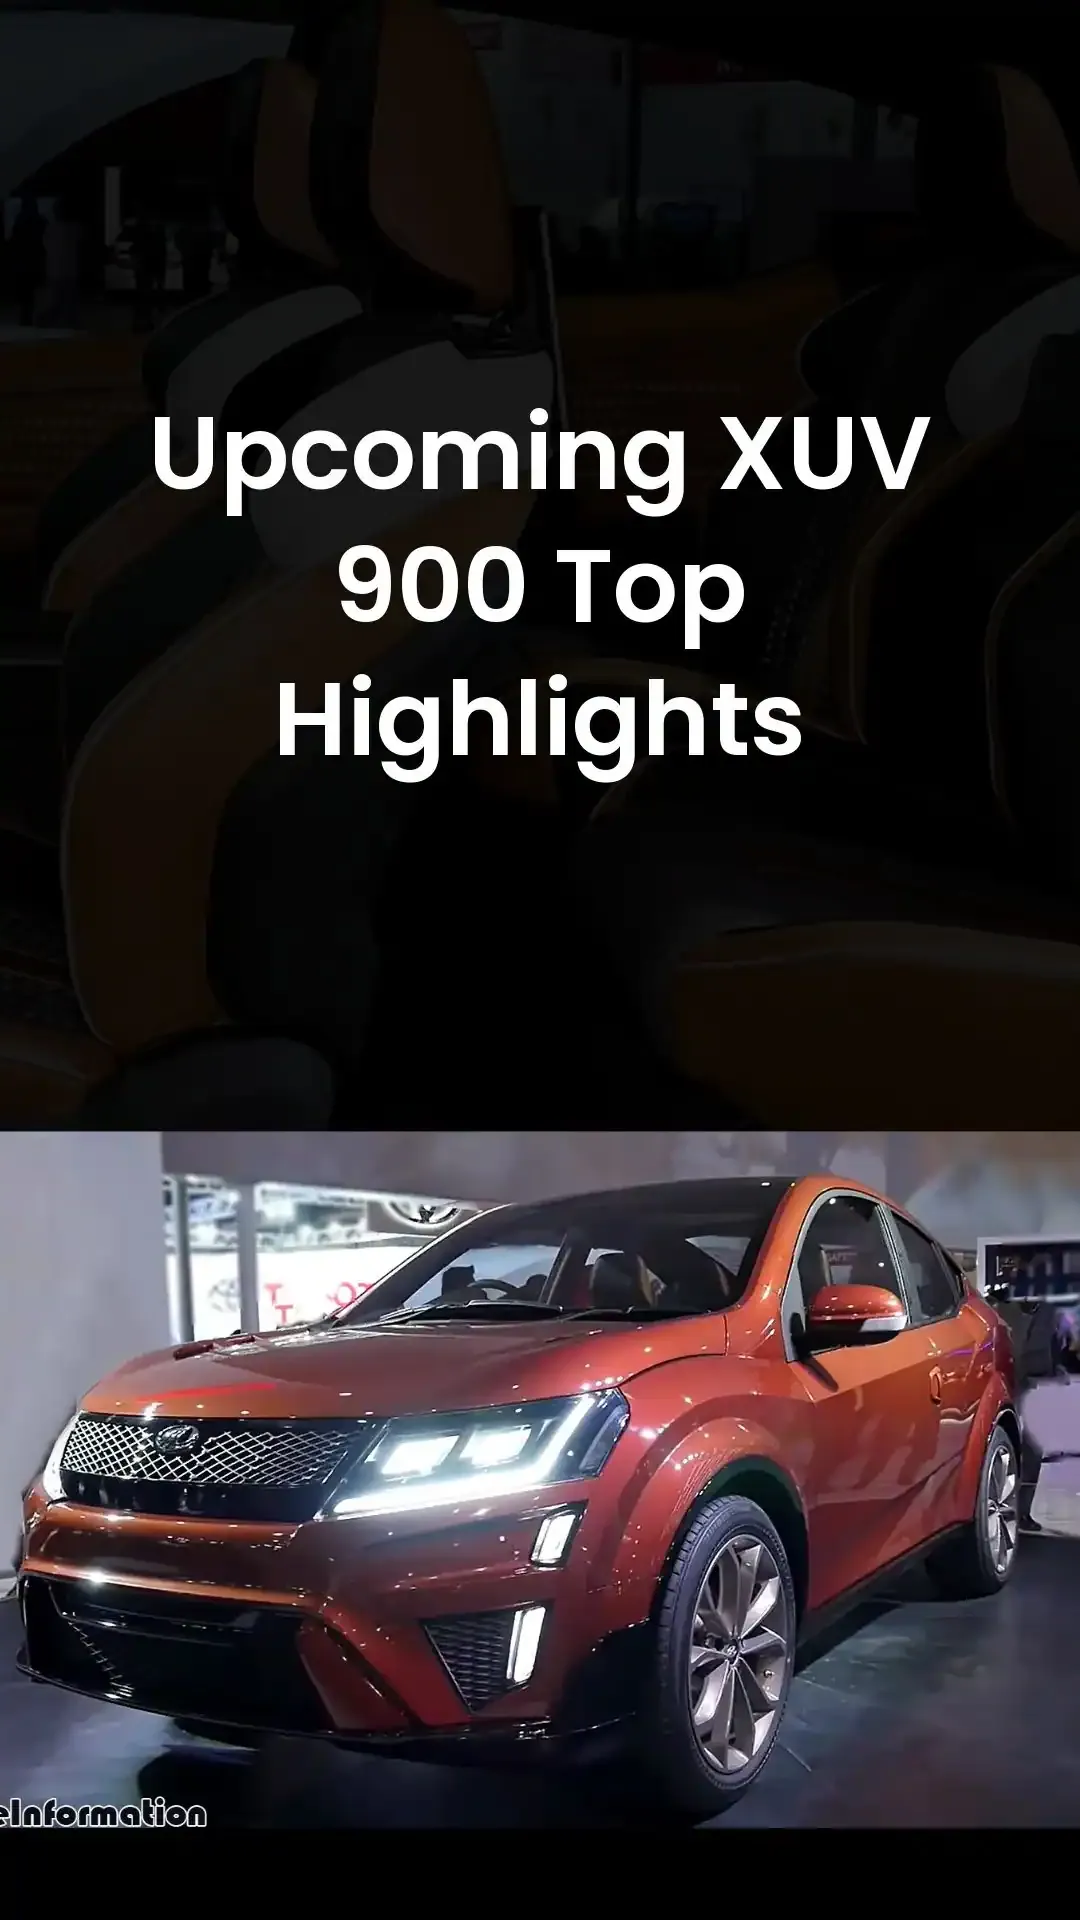 https://stories.carbikeinformation.com/Upcoming-XUV-900-Top-Highlights/